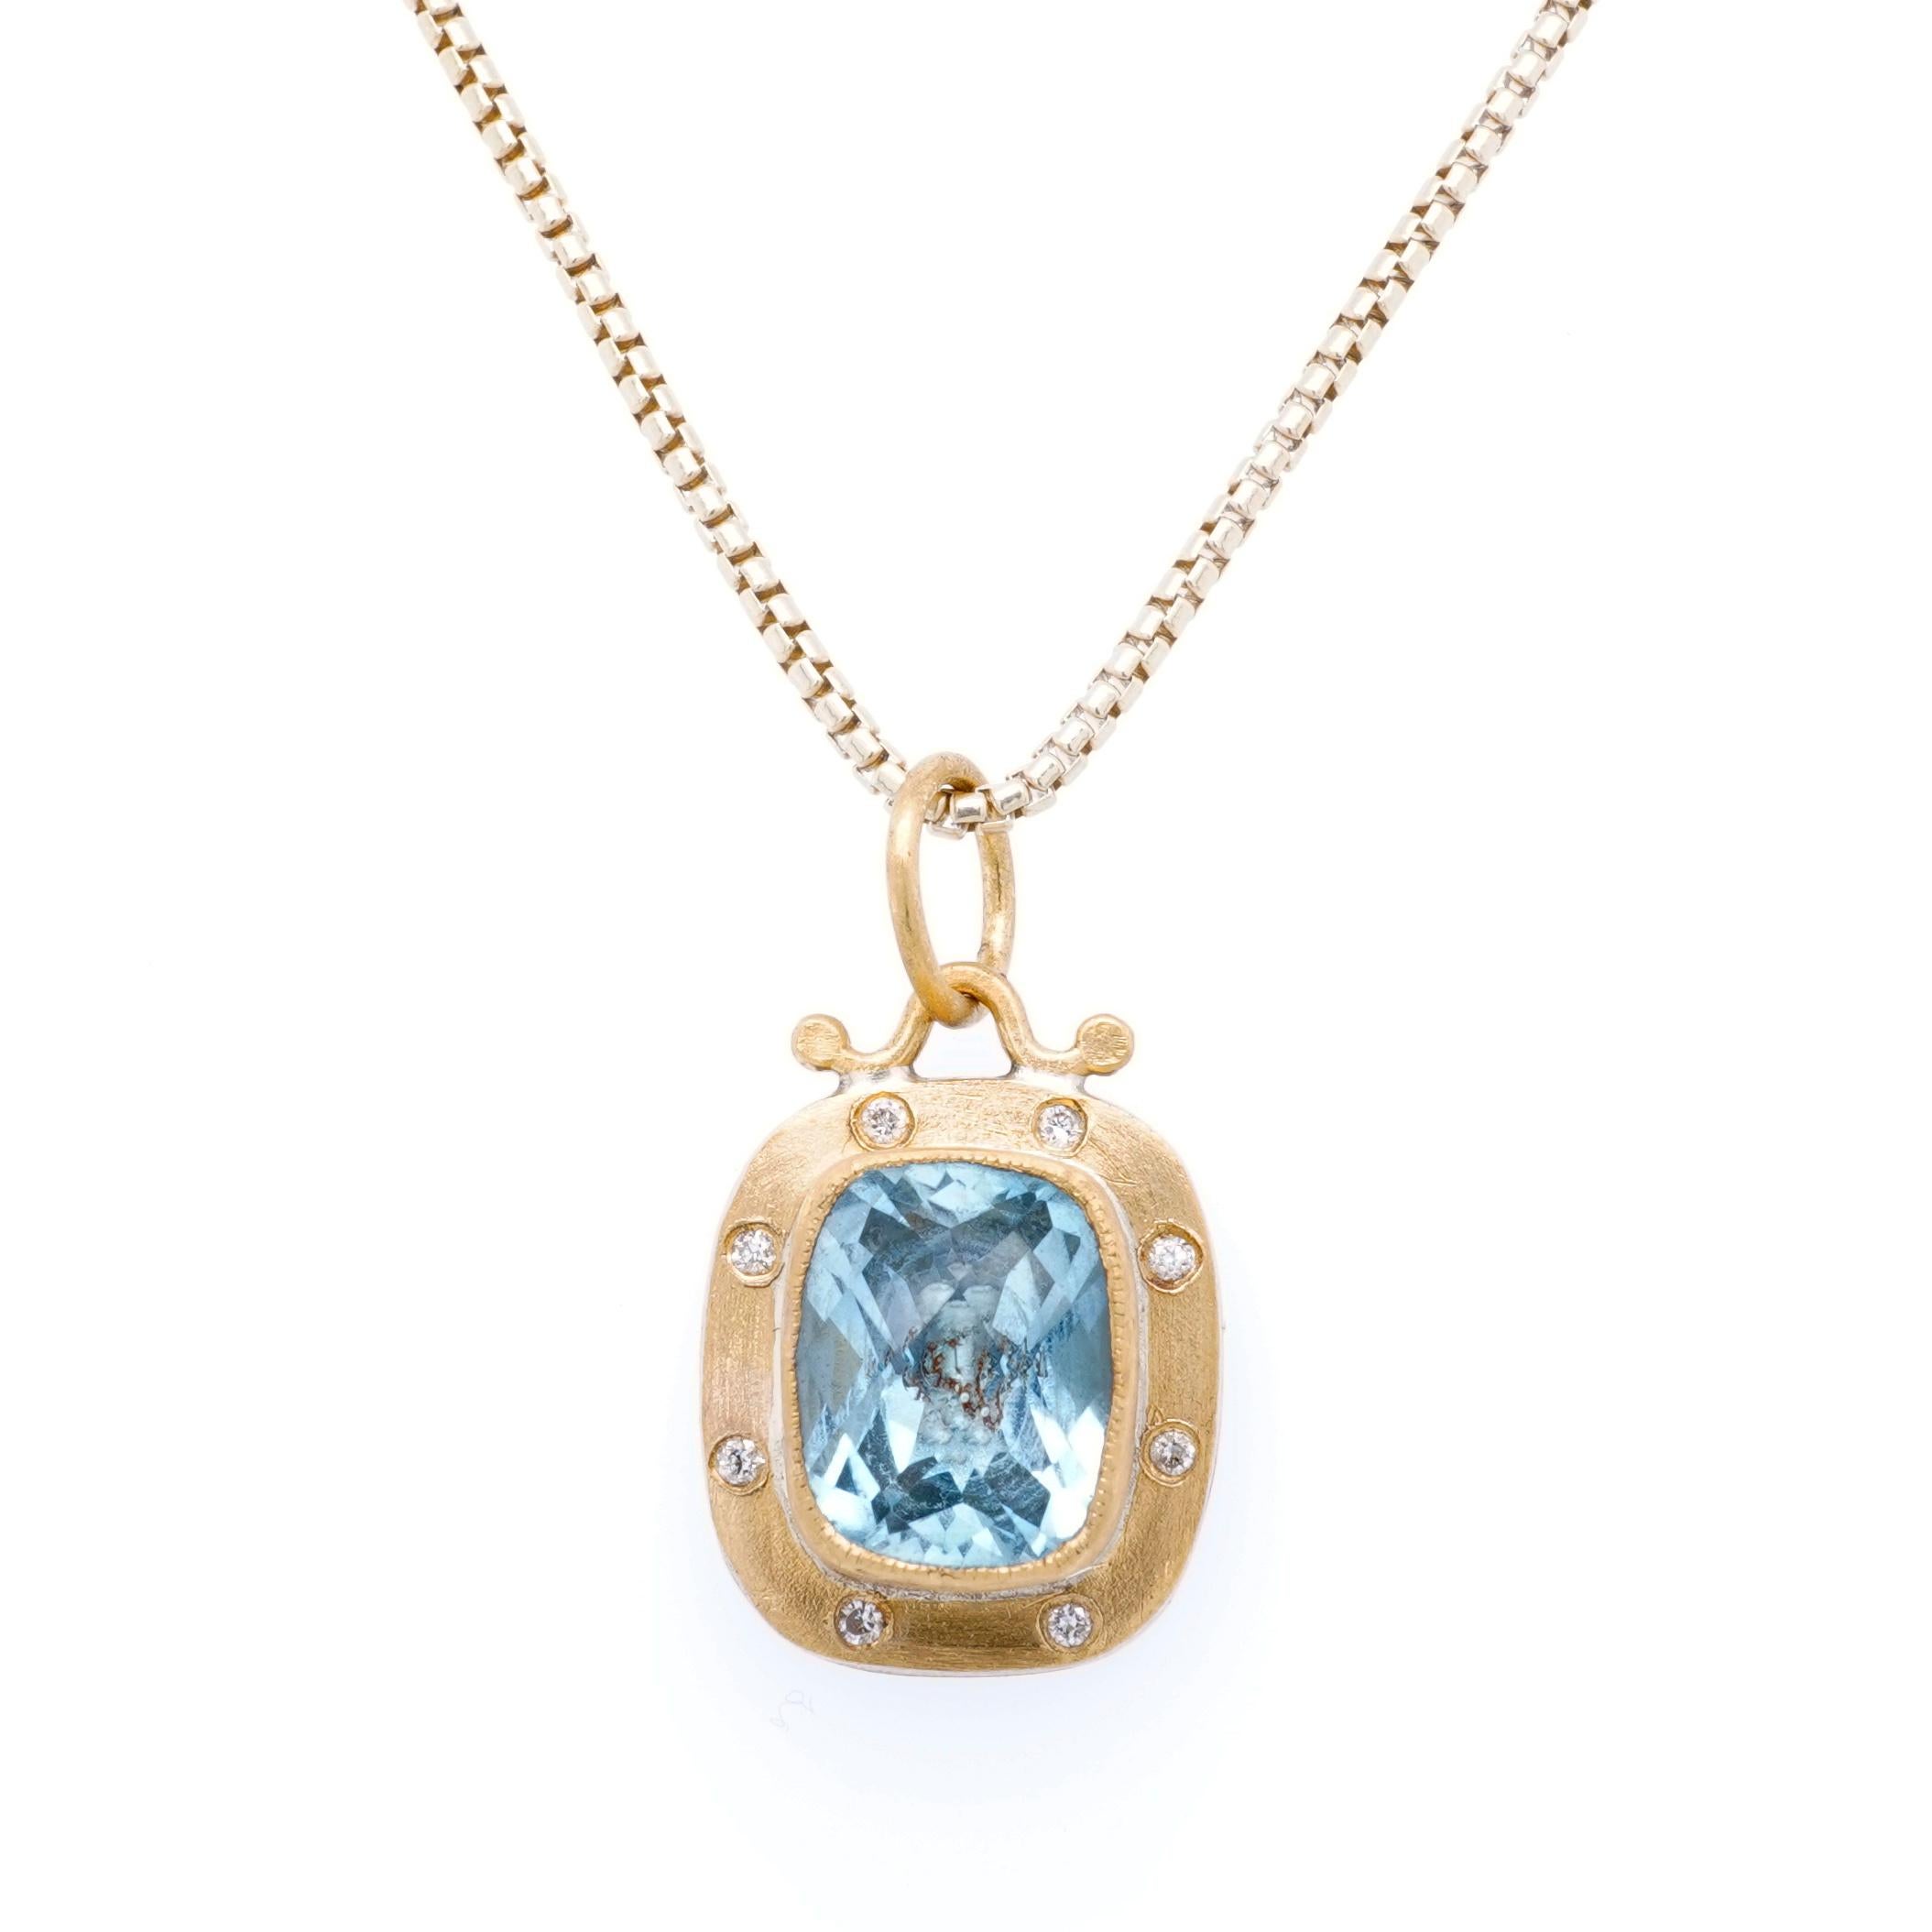 3.65ct Faceted Checkerboard Light Blue Topaz Charm Pendant Necklace with Diamond In New Condition For Sale In Bozeman, MT